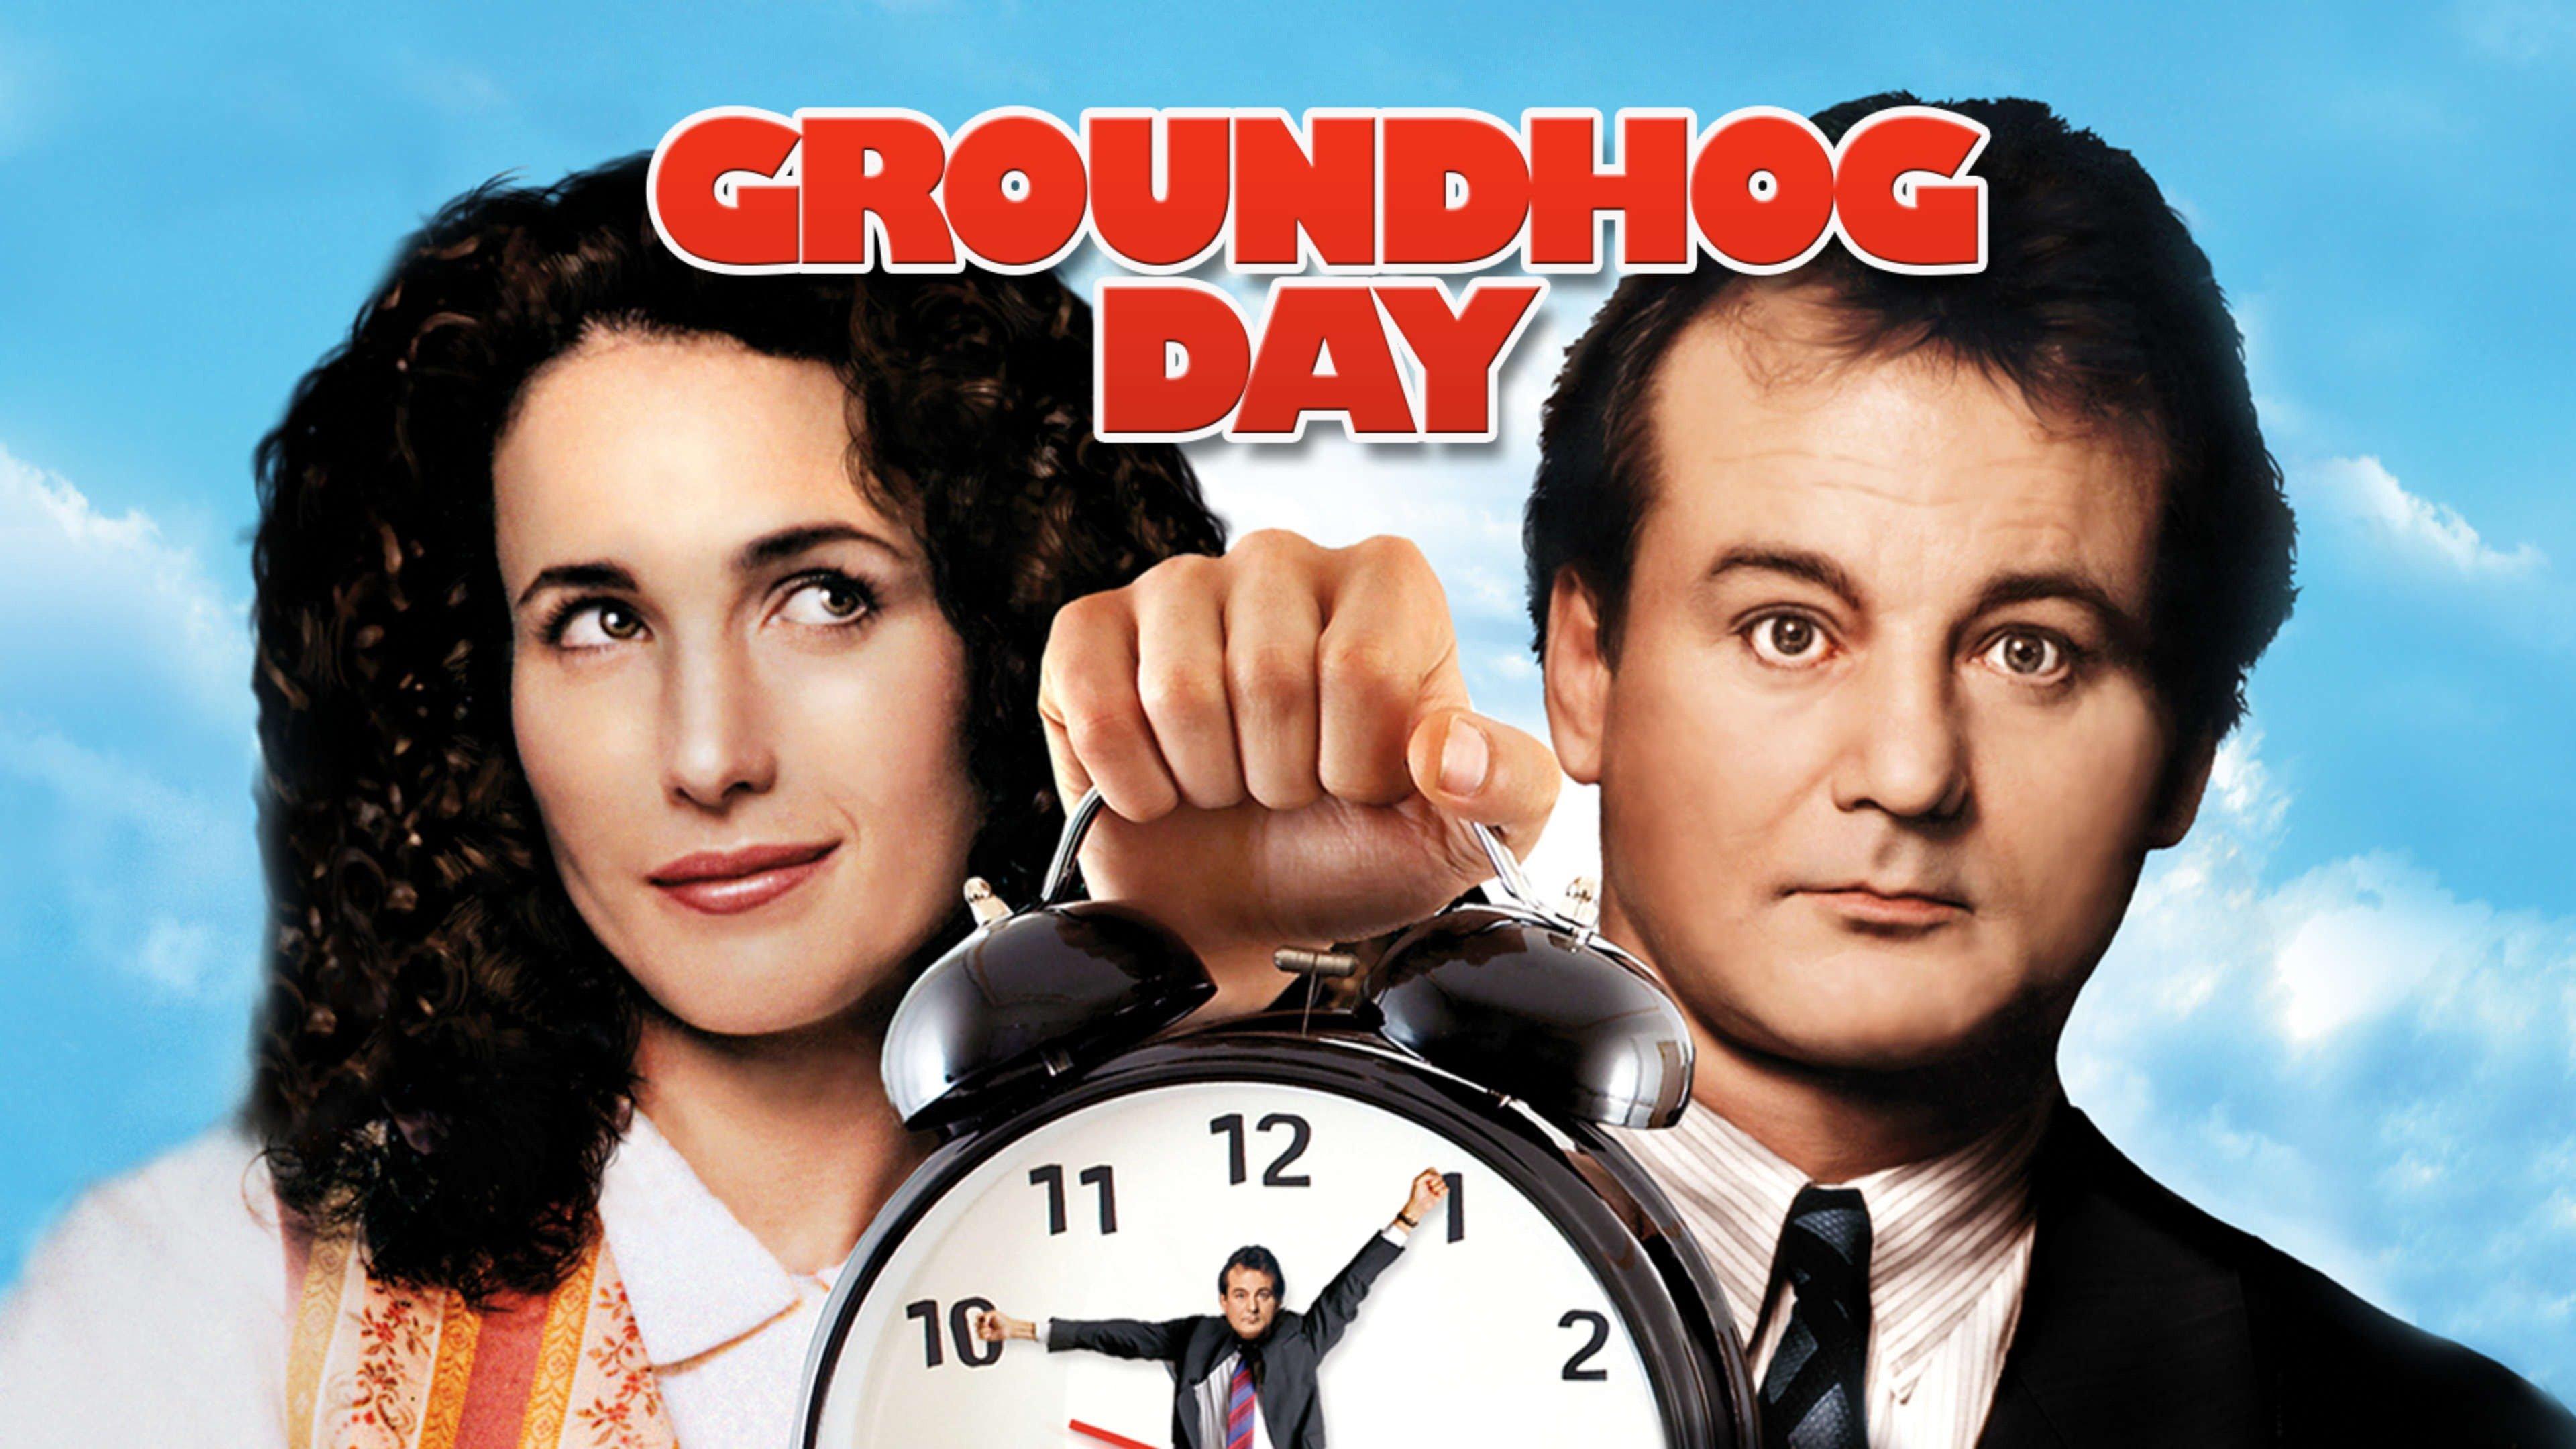 Watch Groundhog Day Streaming Online on Philo (Free Trial)